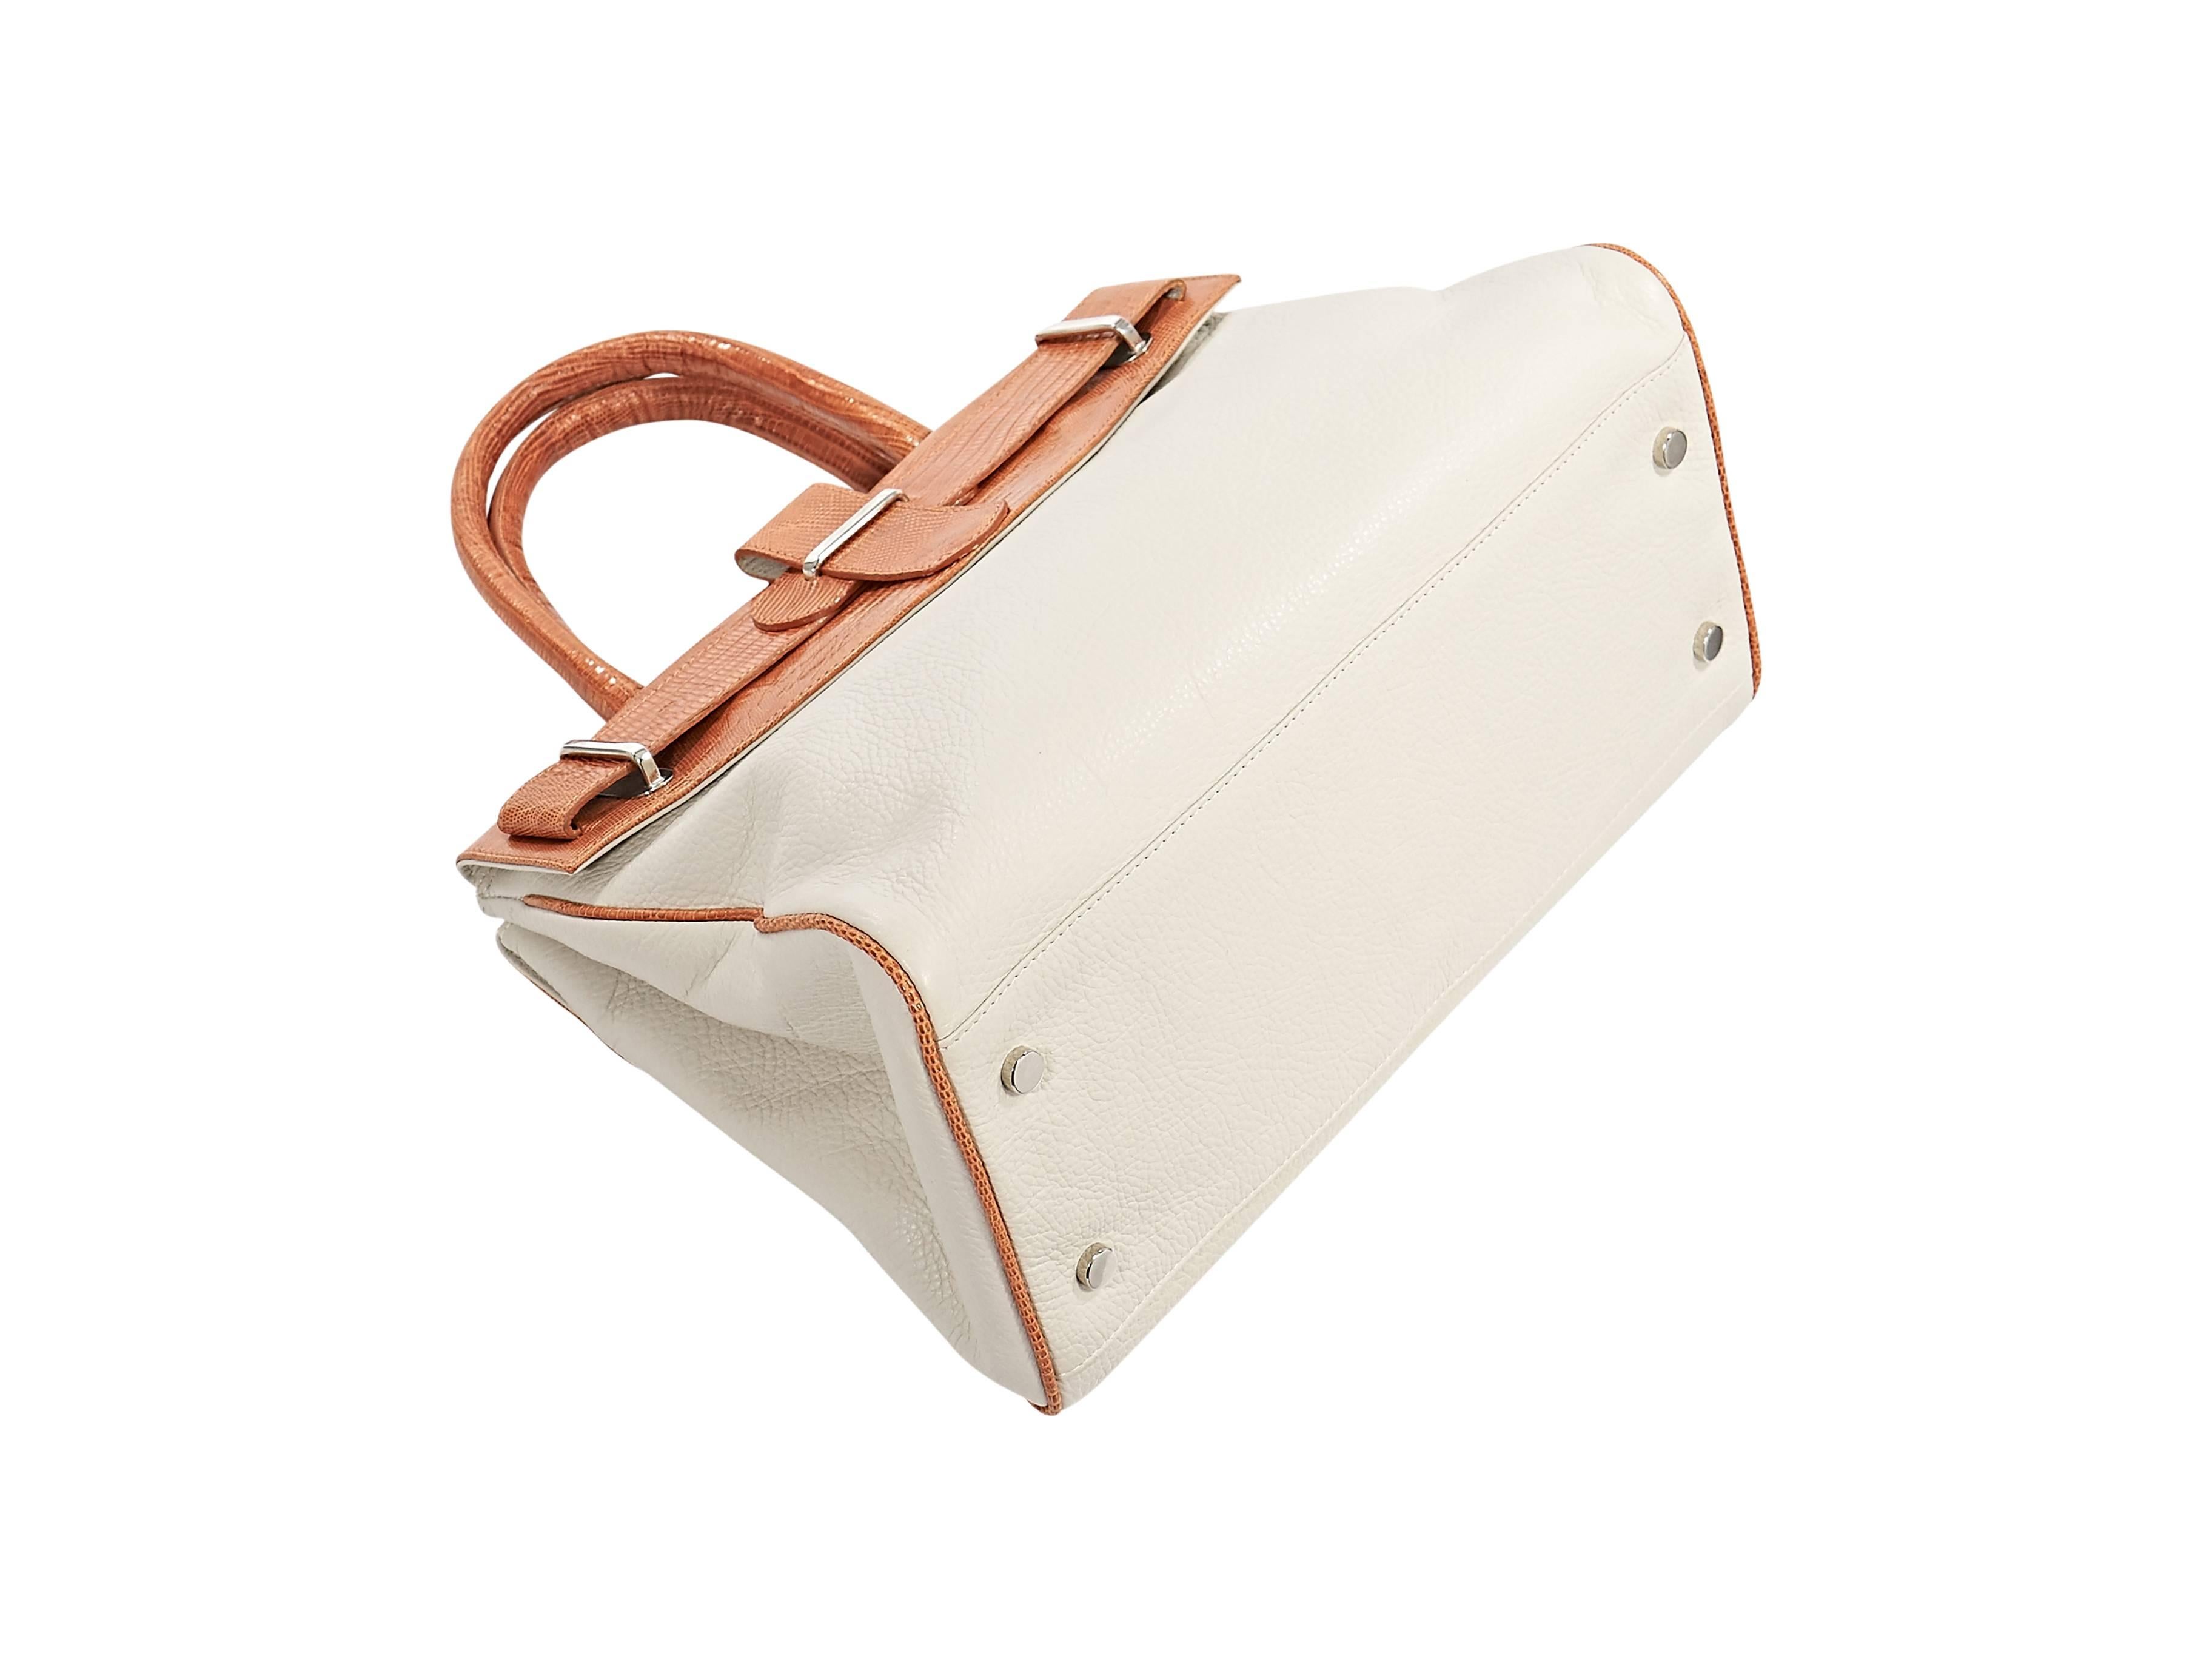 Product details:  ﻿White leather structured tote bag by Daniella Ortiz.  Trimmed with exotic orange lizard skin.  Dual carry handles.  Outer flap pockets.  Magnetic snap closure.  Lined interior with two inner compartments and zip pocket. Protective